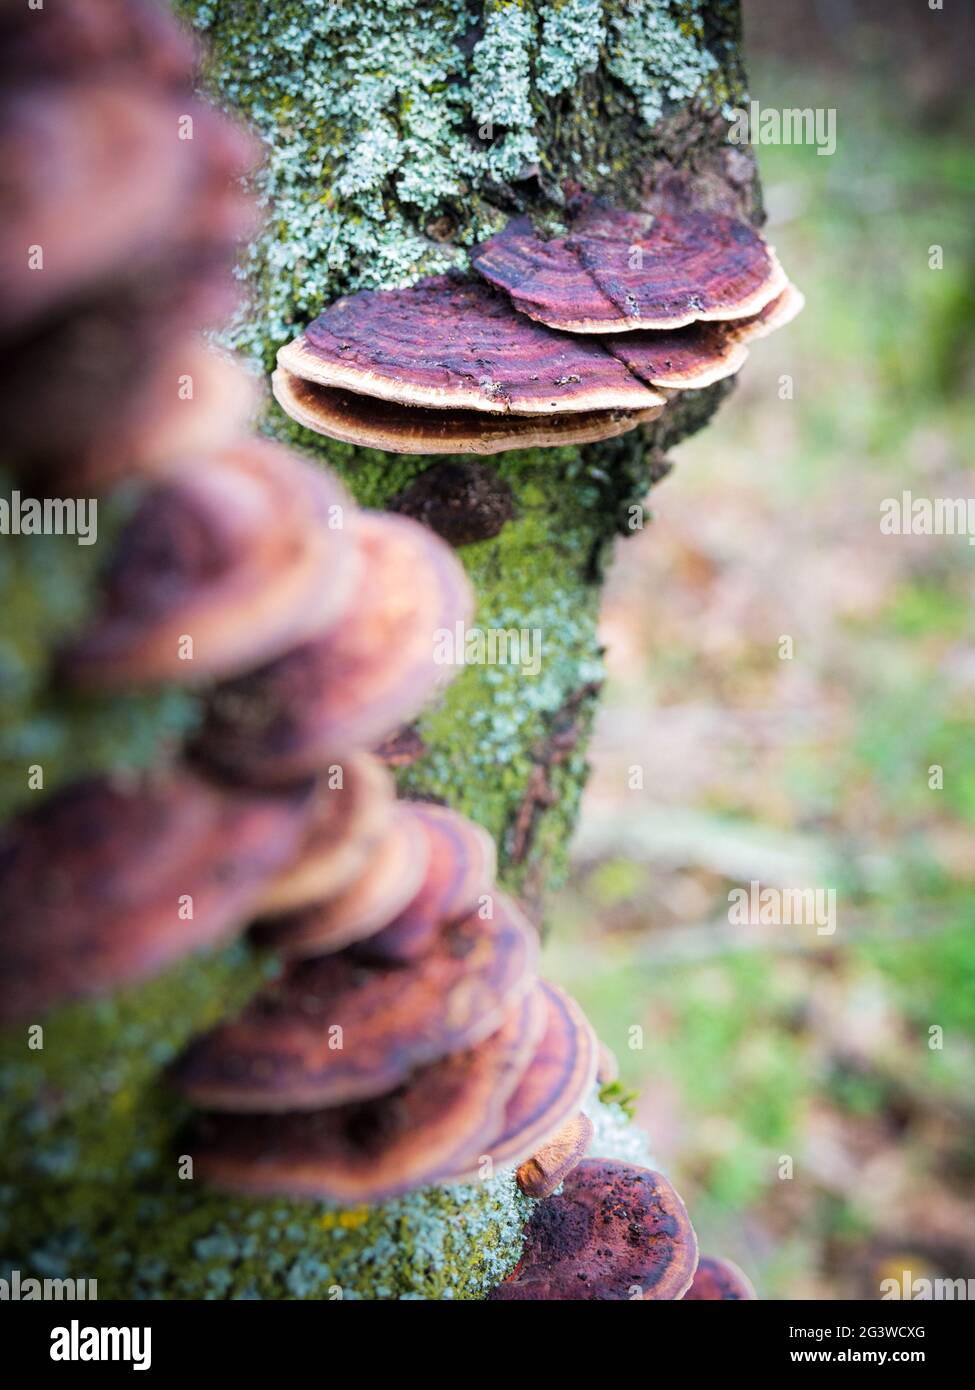 Mushroom on a tree trunk in te forest Stock Photo